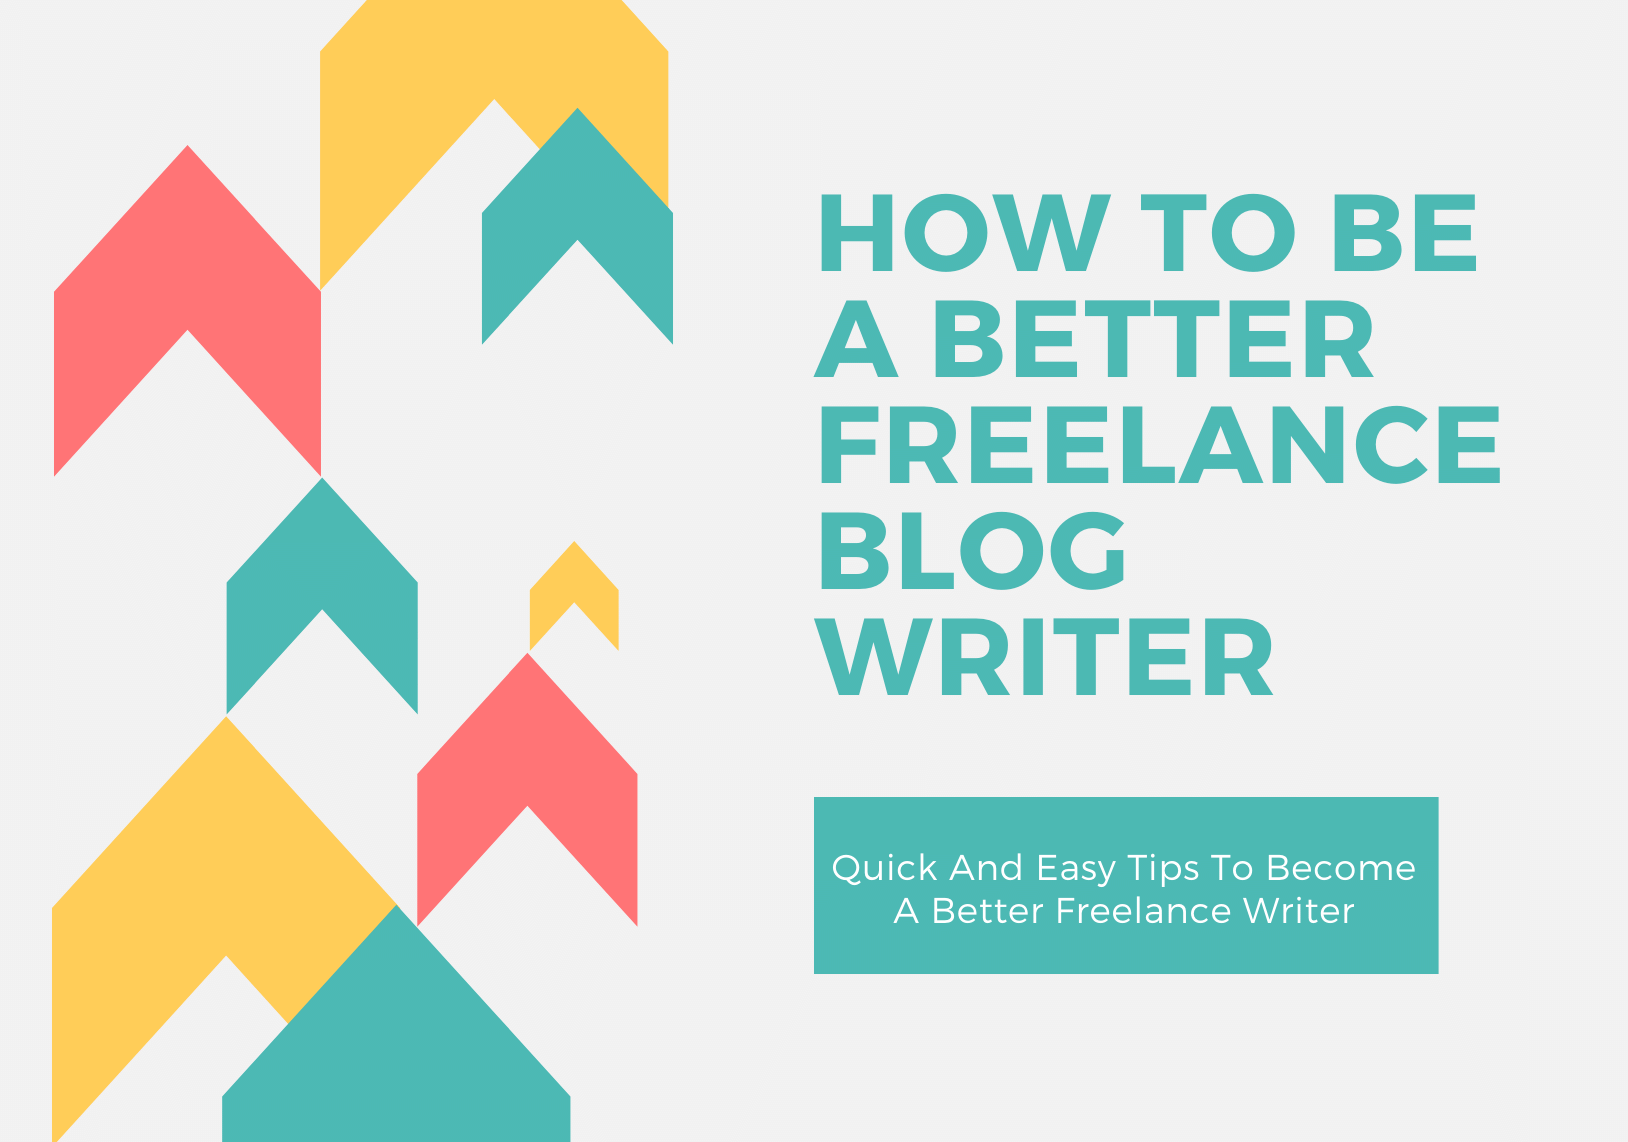 How To Be A Better Freelance Blog Writer